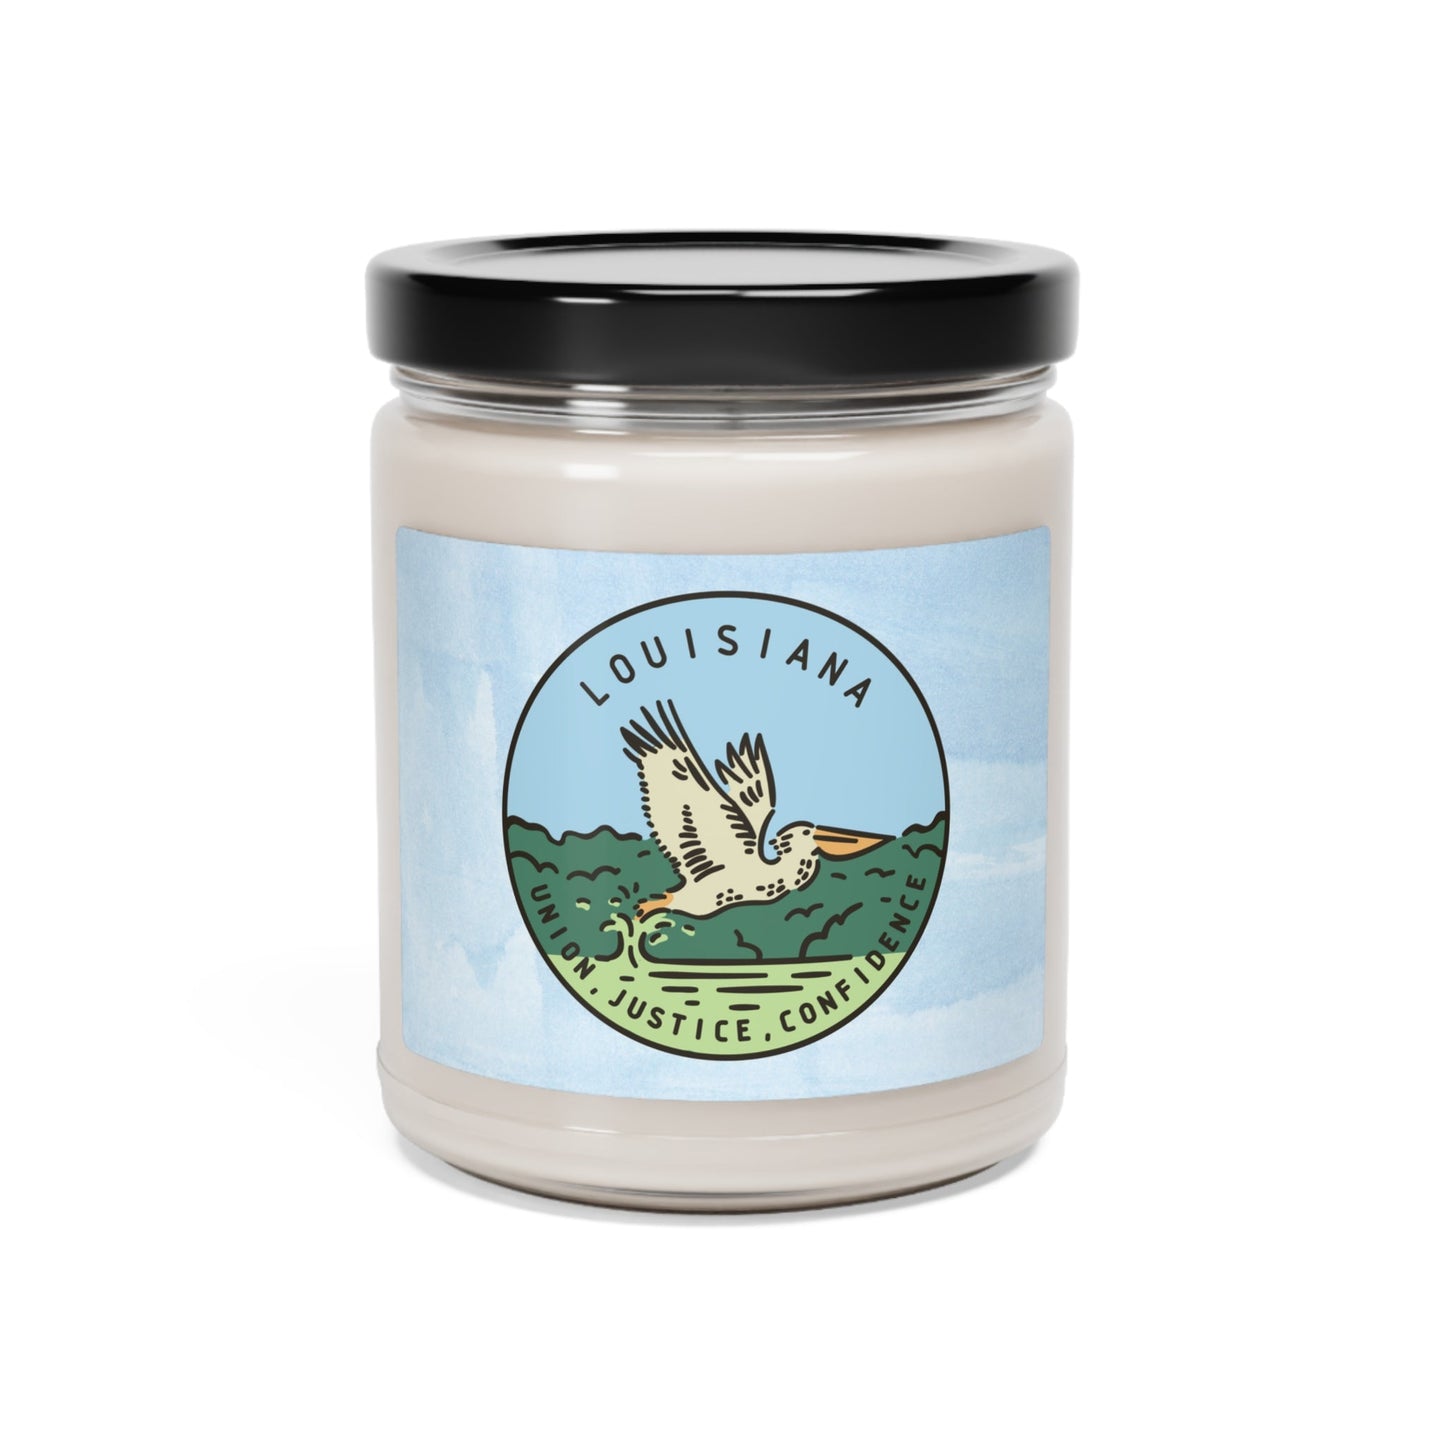 Louisiana Scented Soy Candle, 9oz